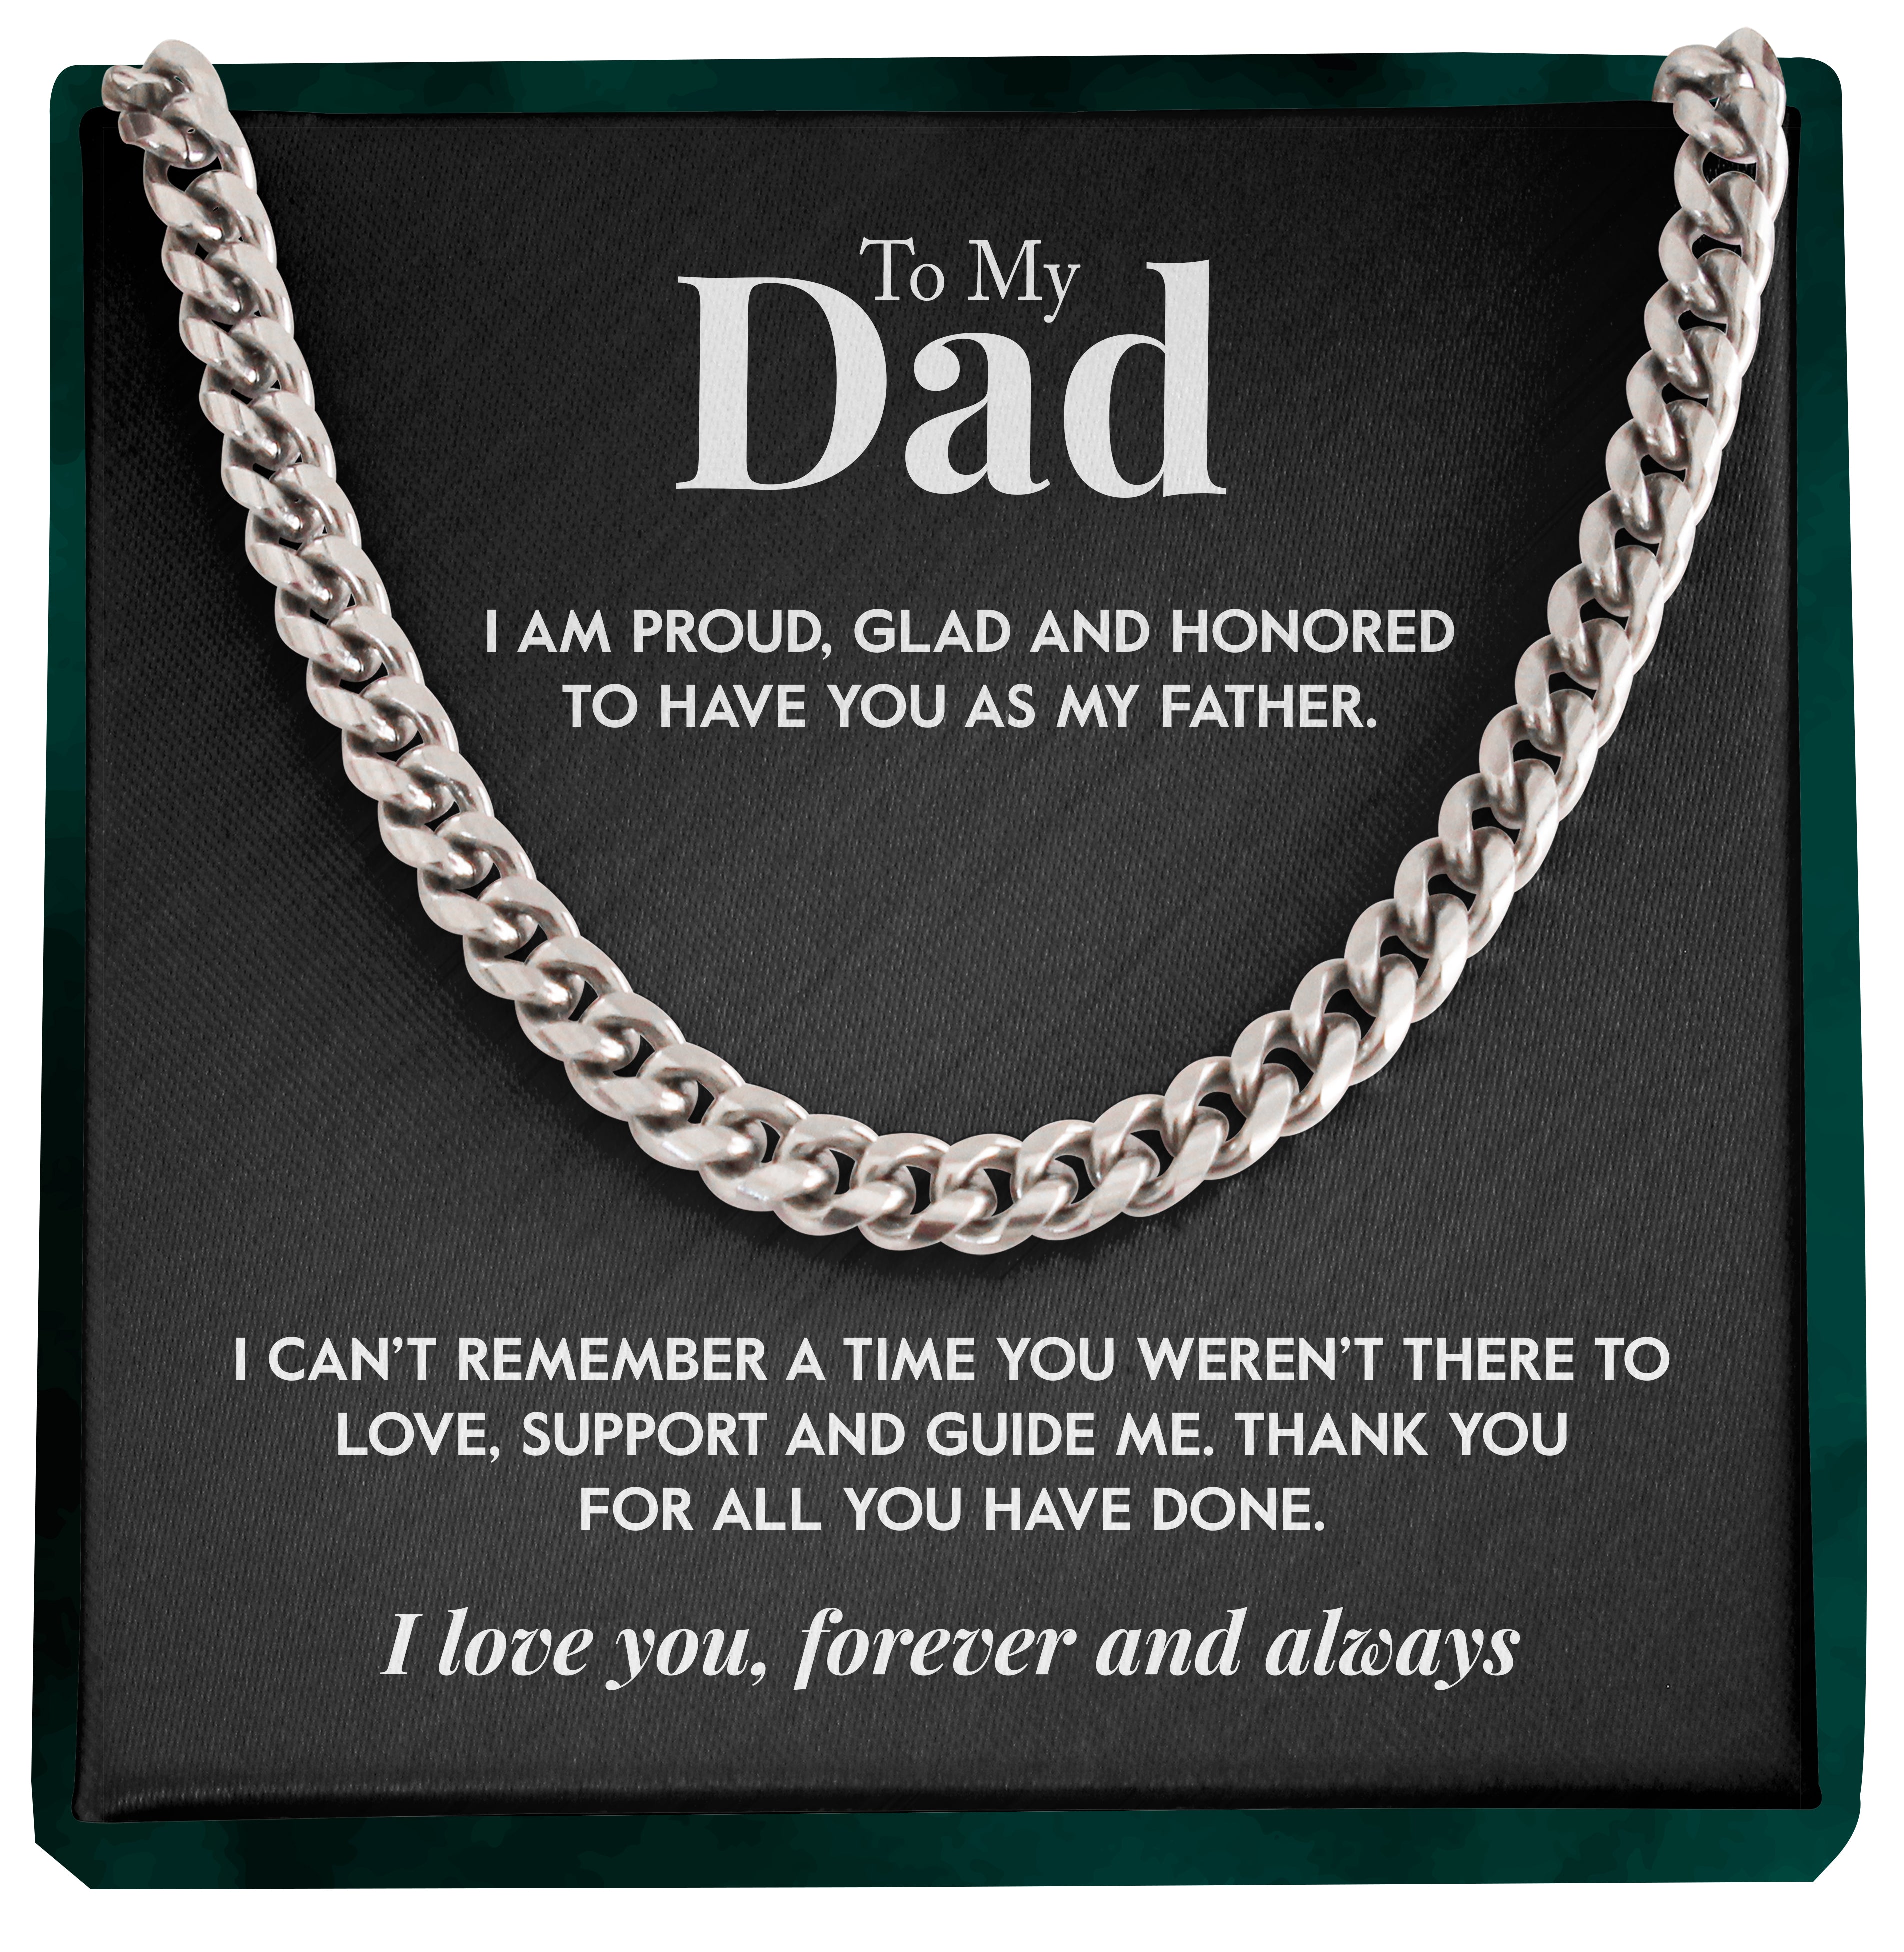 To My Dad | "Thank You" | Cuban Chain Link